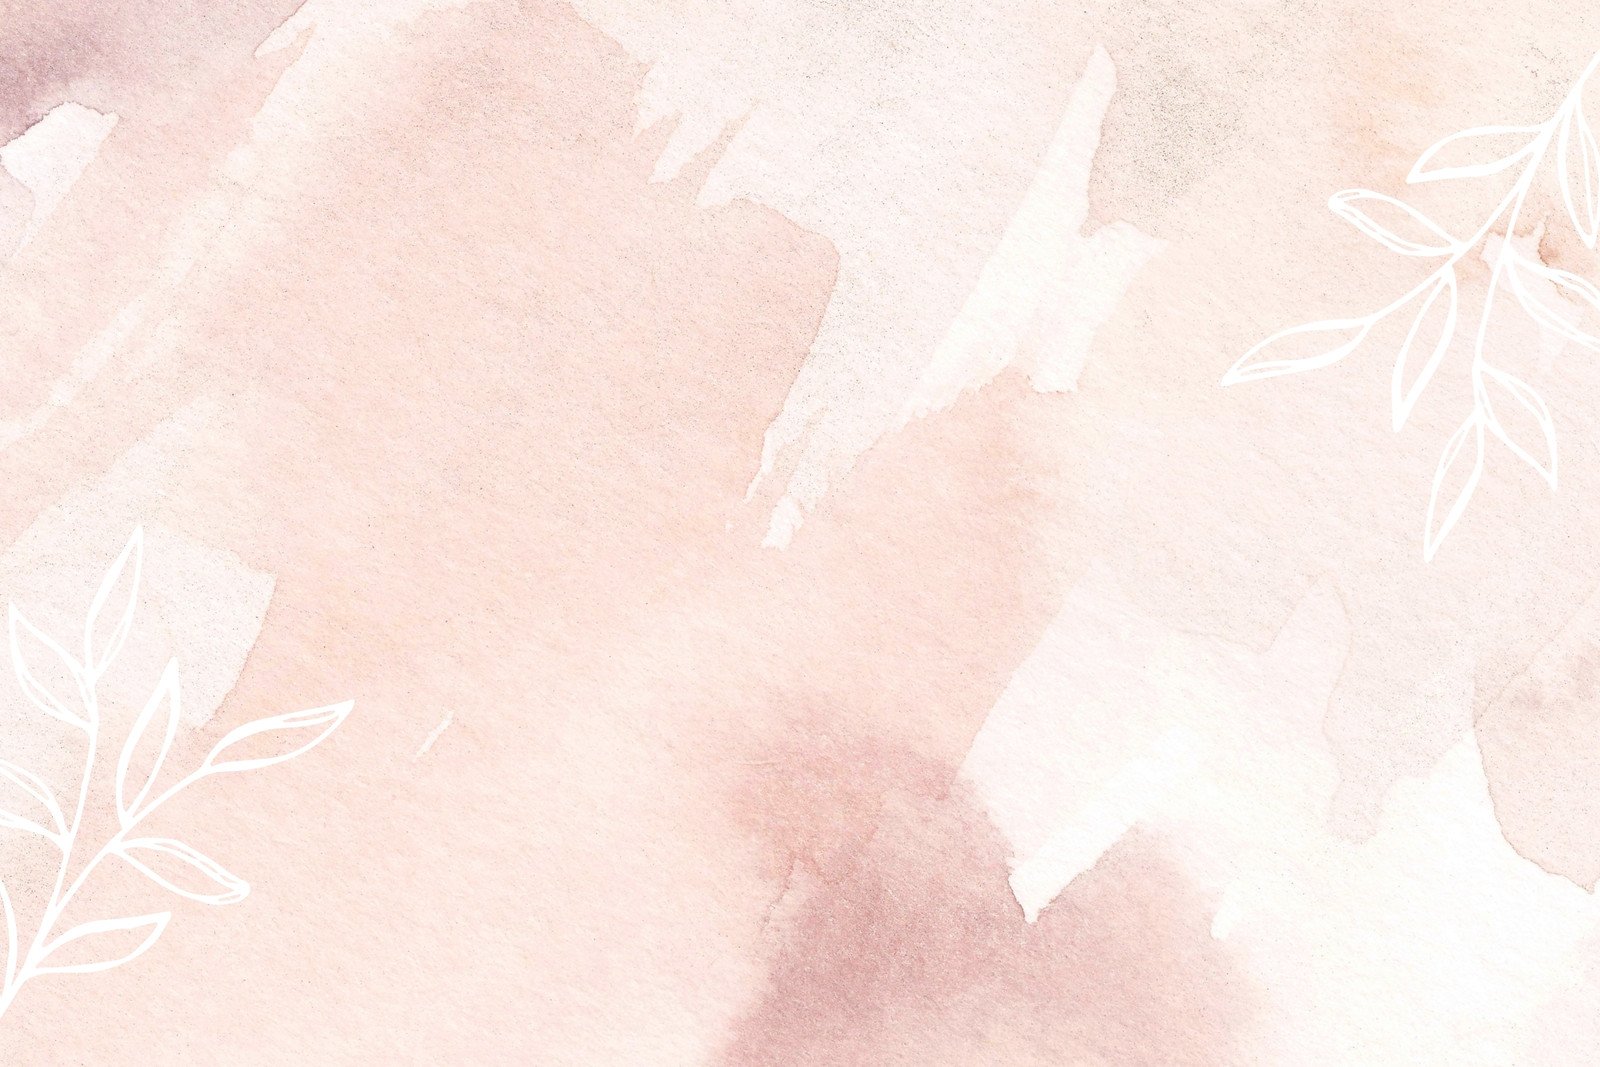 Free Pink Watercolor Texture